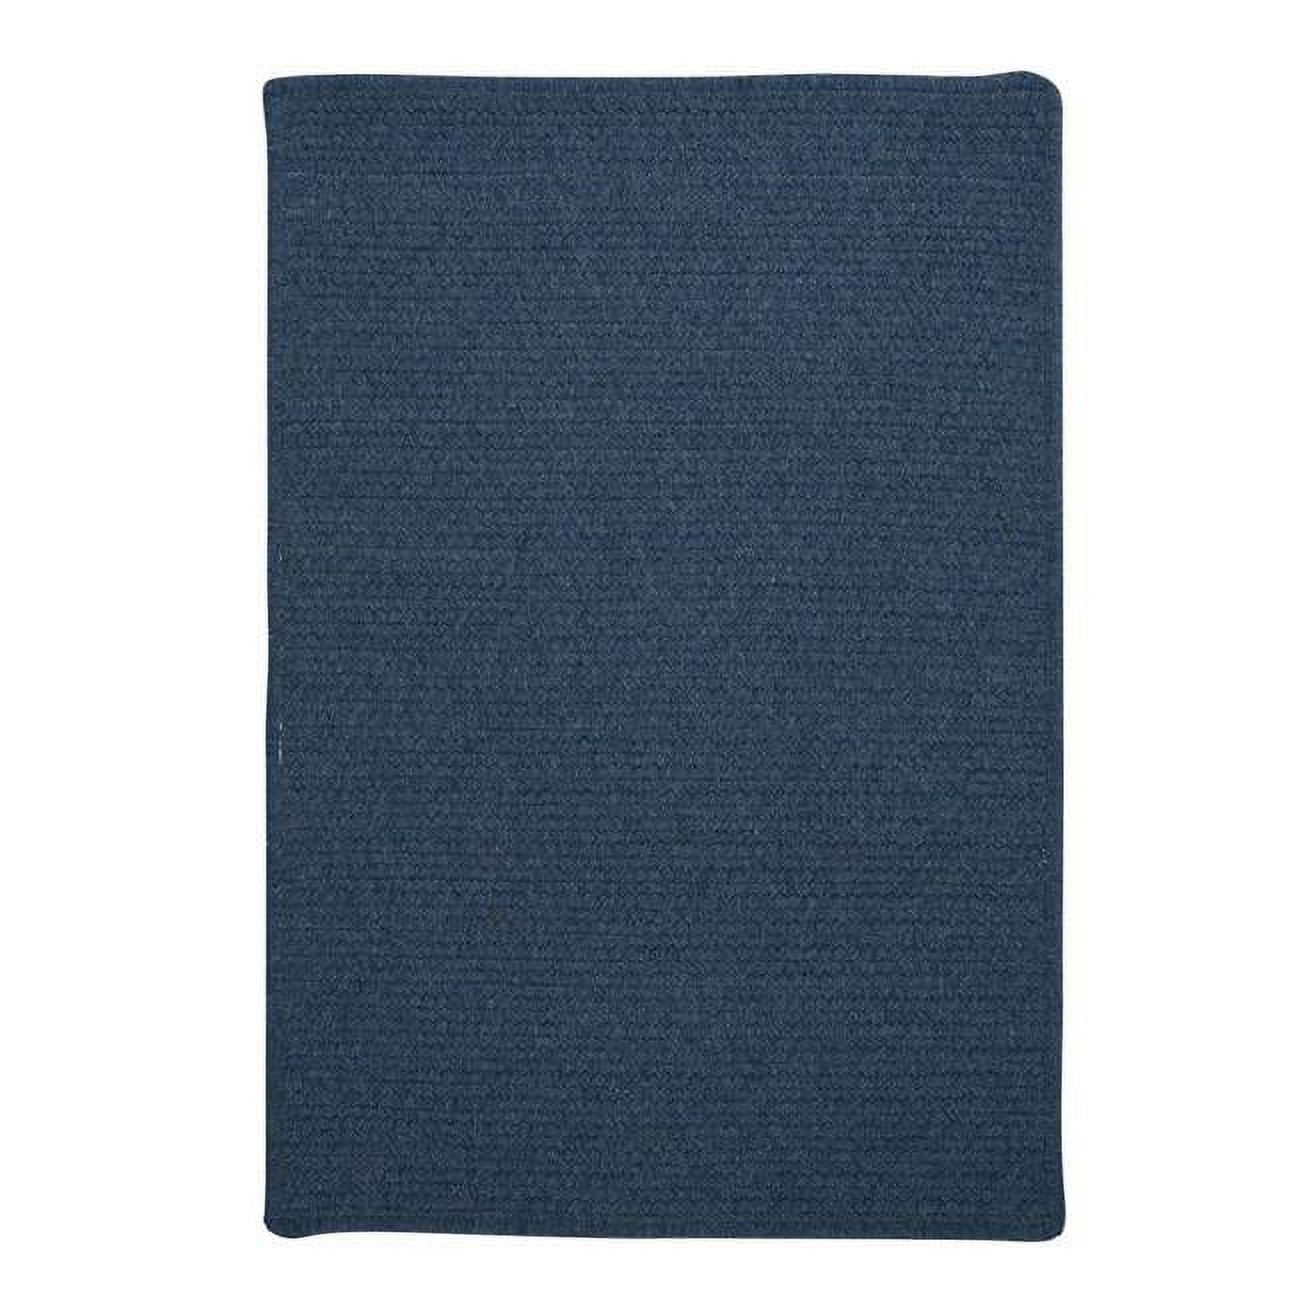 Colonial Mills 11' Federal Blue Handmade Braided Reversible Square Area Throw Rug - image 1 of 2